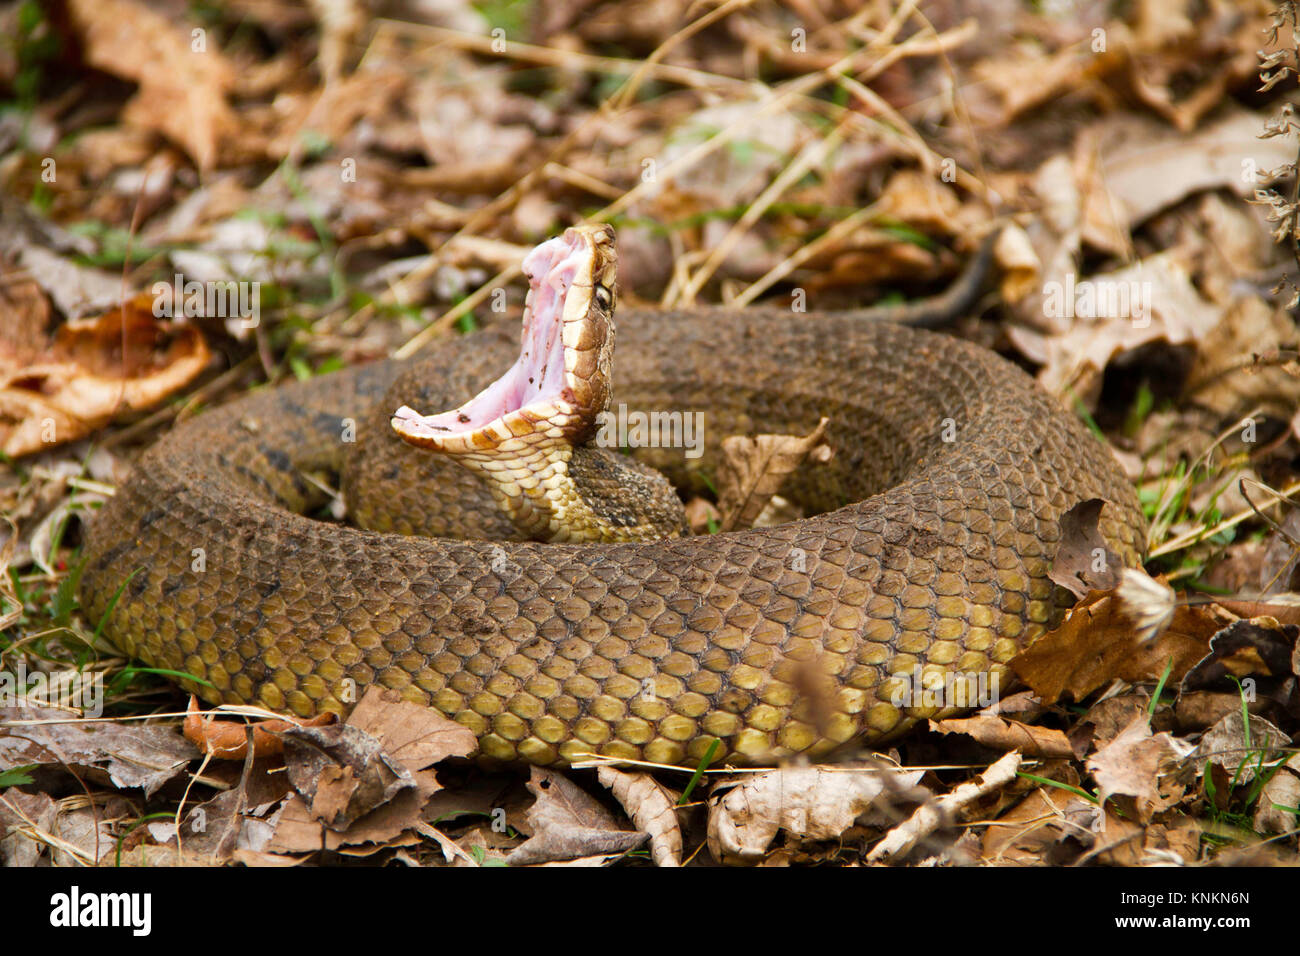 Cottonmouth (Agkistrodon piscivorus) coiled in leaves, with classic open mouth threat display Stock Photo